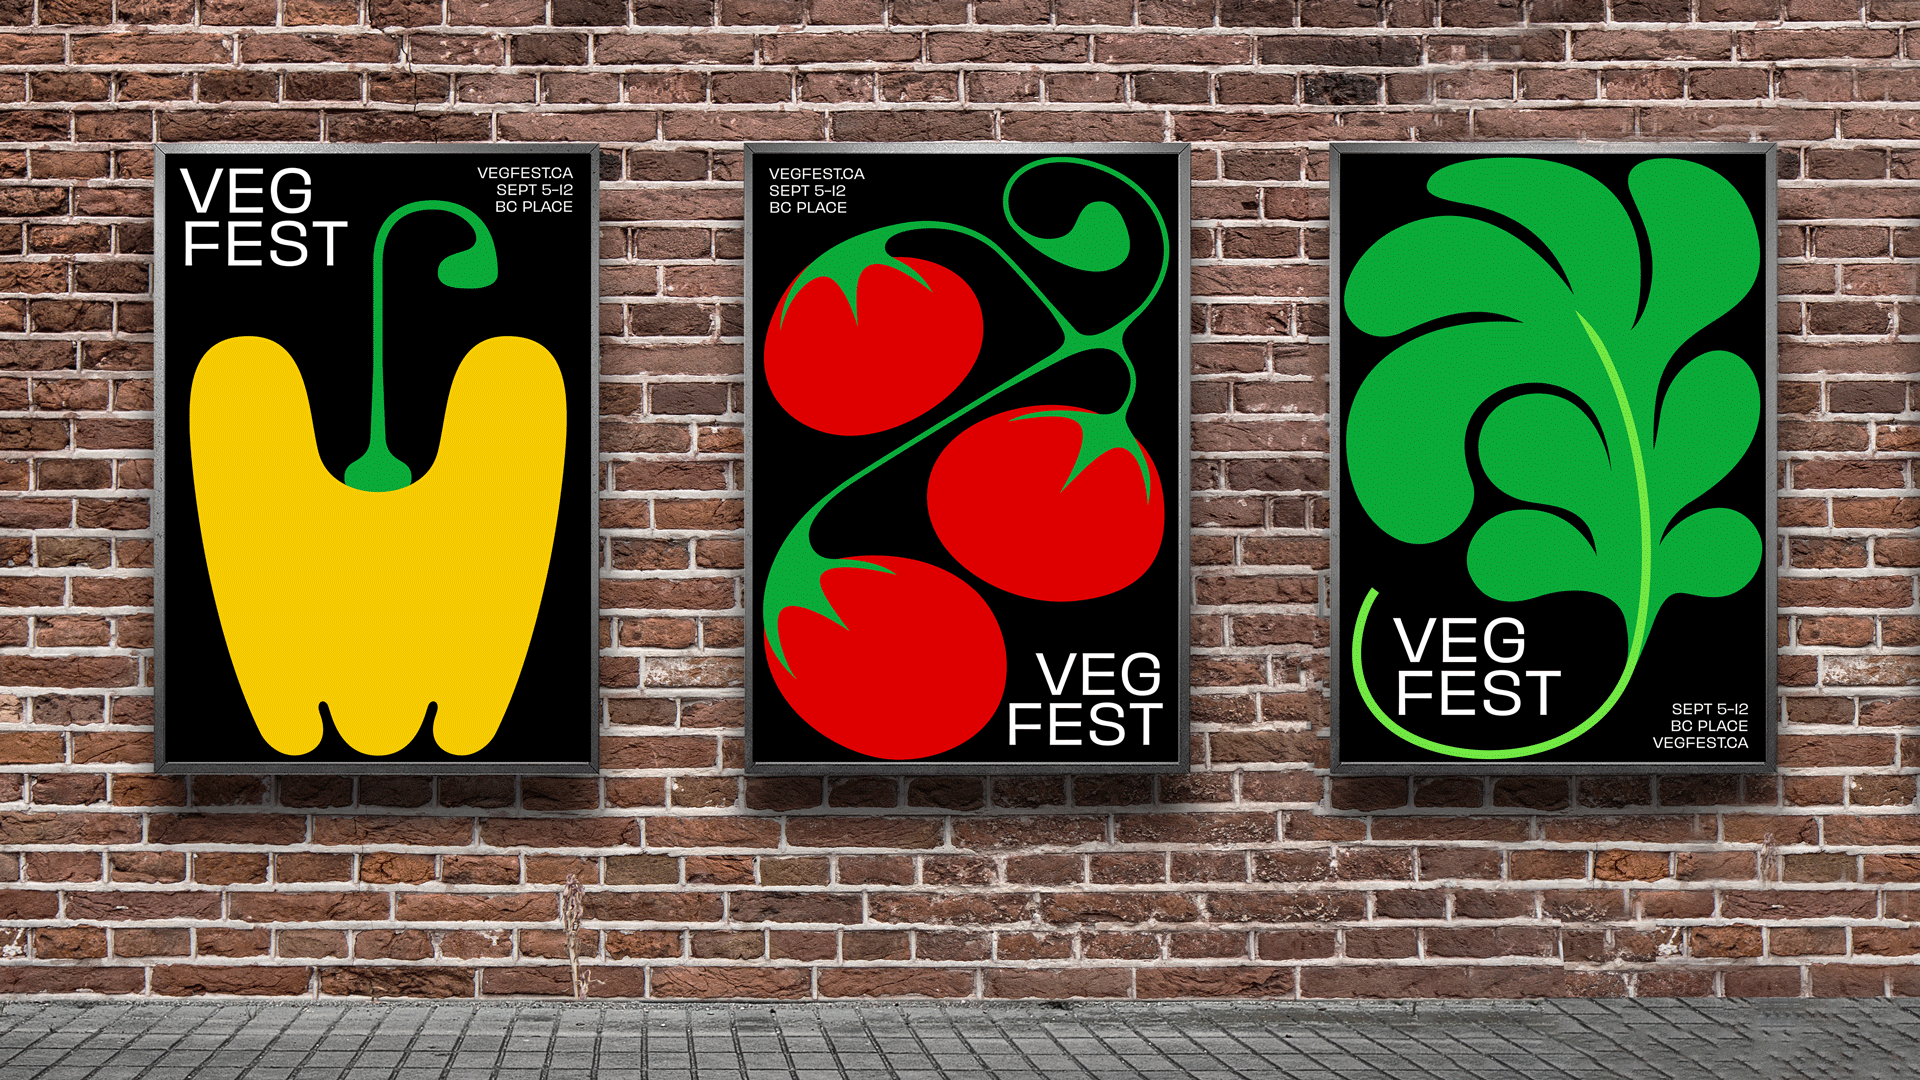 Two festival passes with highly stylized illustrations of a beet and bok choy on black backgrounds. The badge text reads “Vendor. Staff. Veg Fest. 2022”